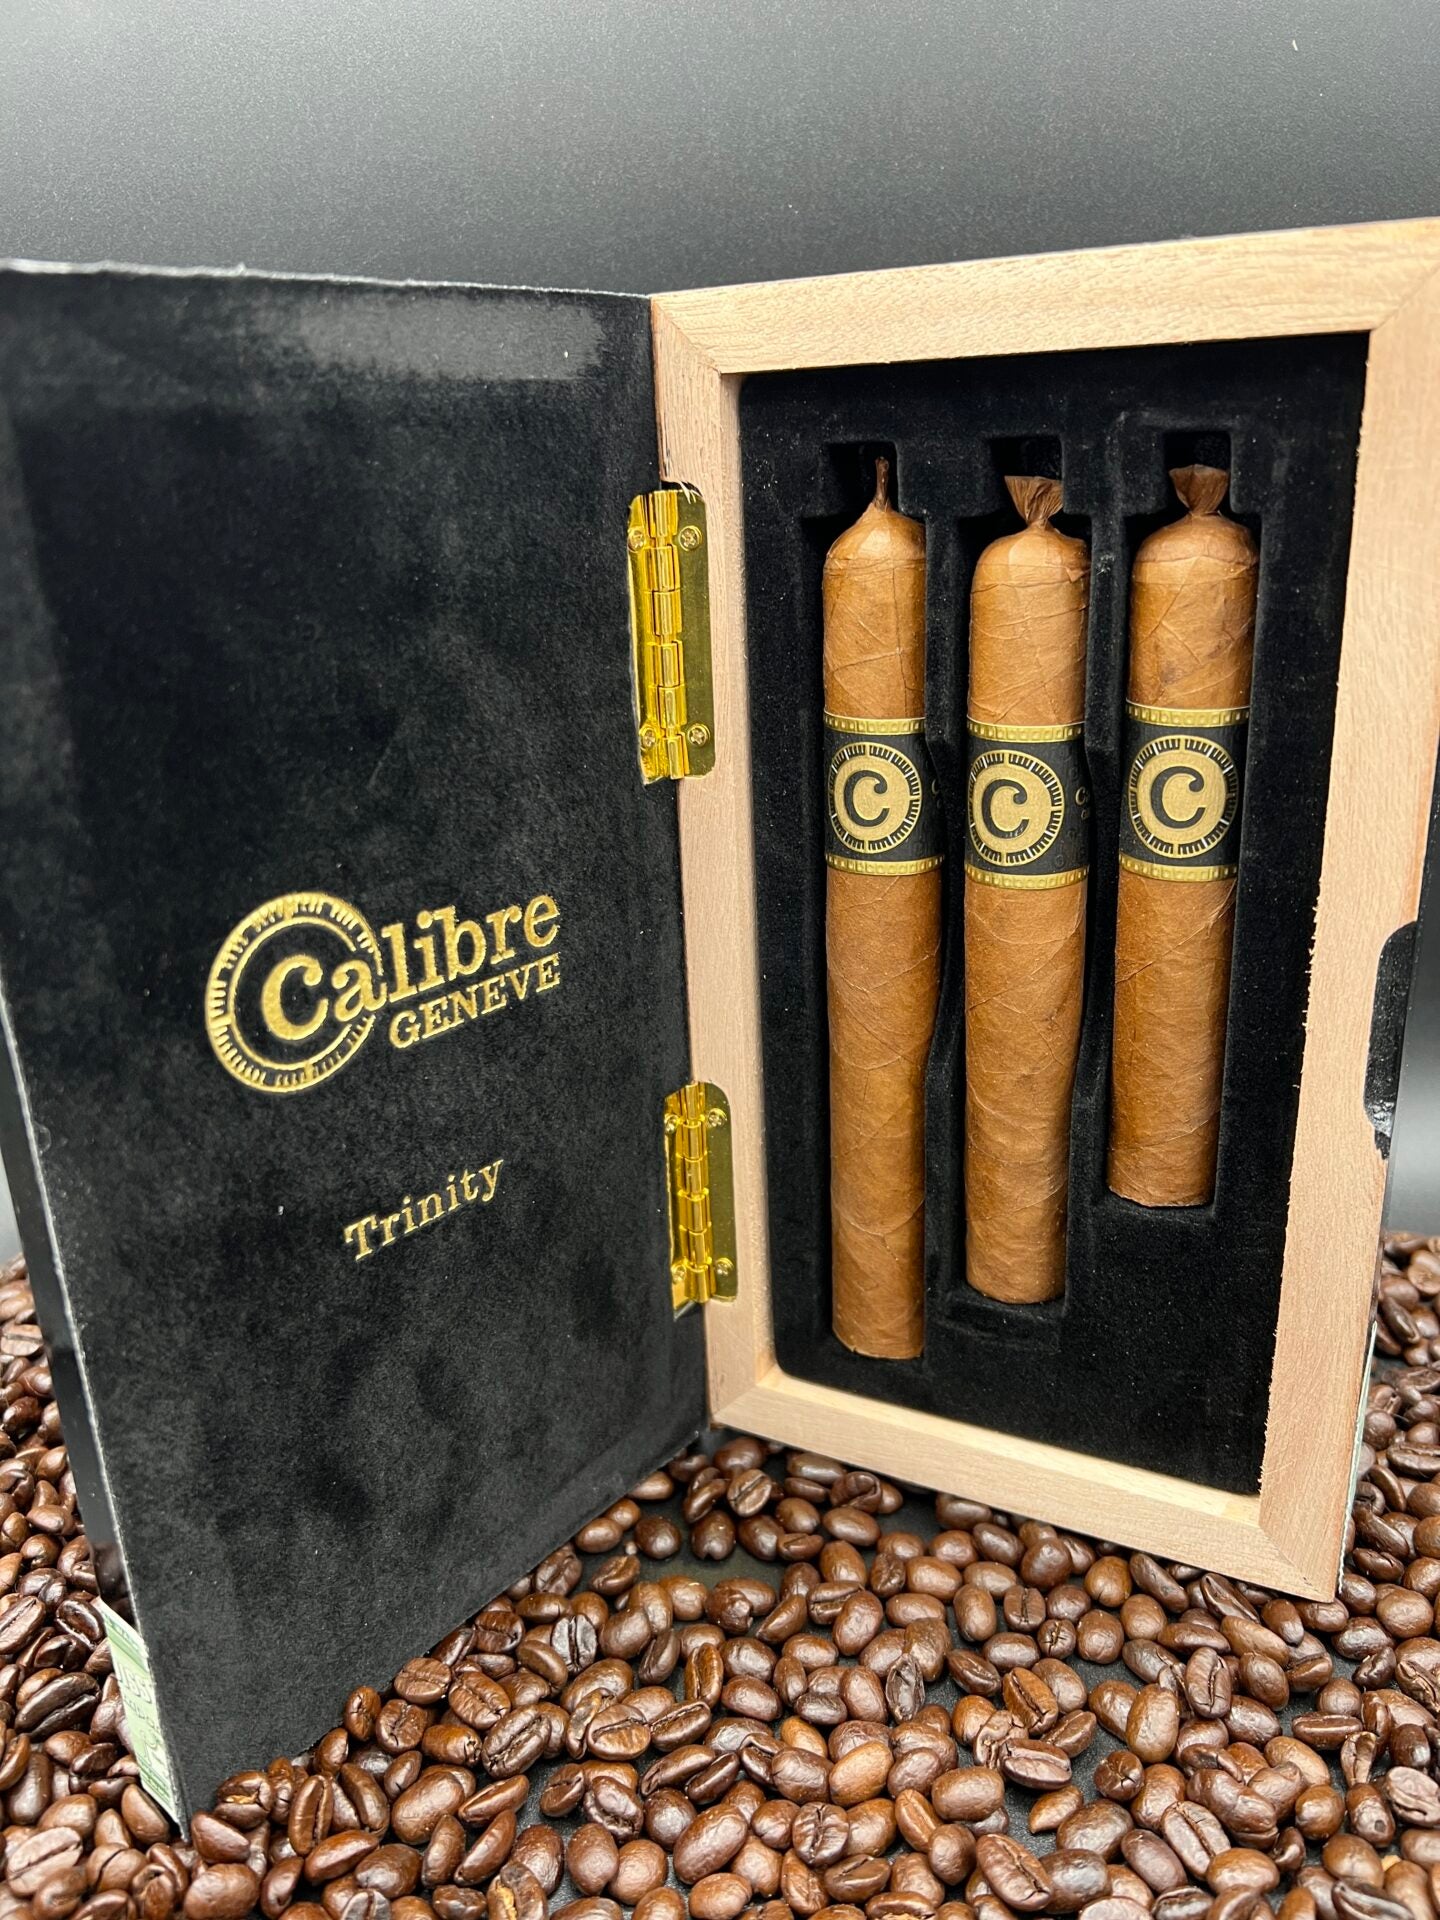 Calibre Genève - Trinity Box Set cigars supplied by Sir Louis Cigars